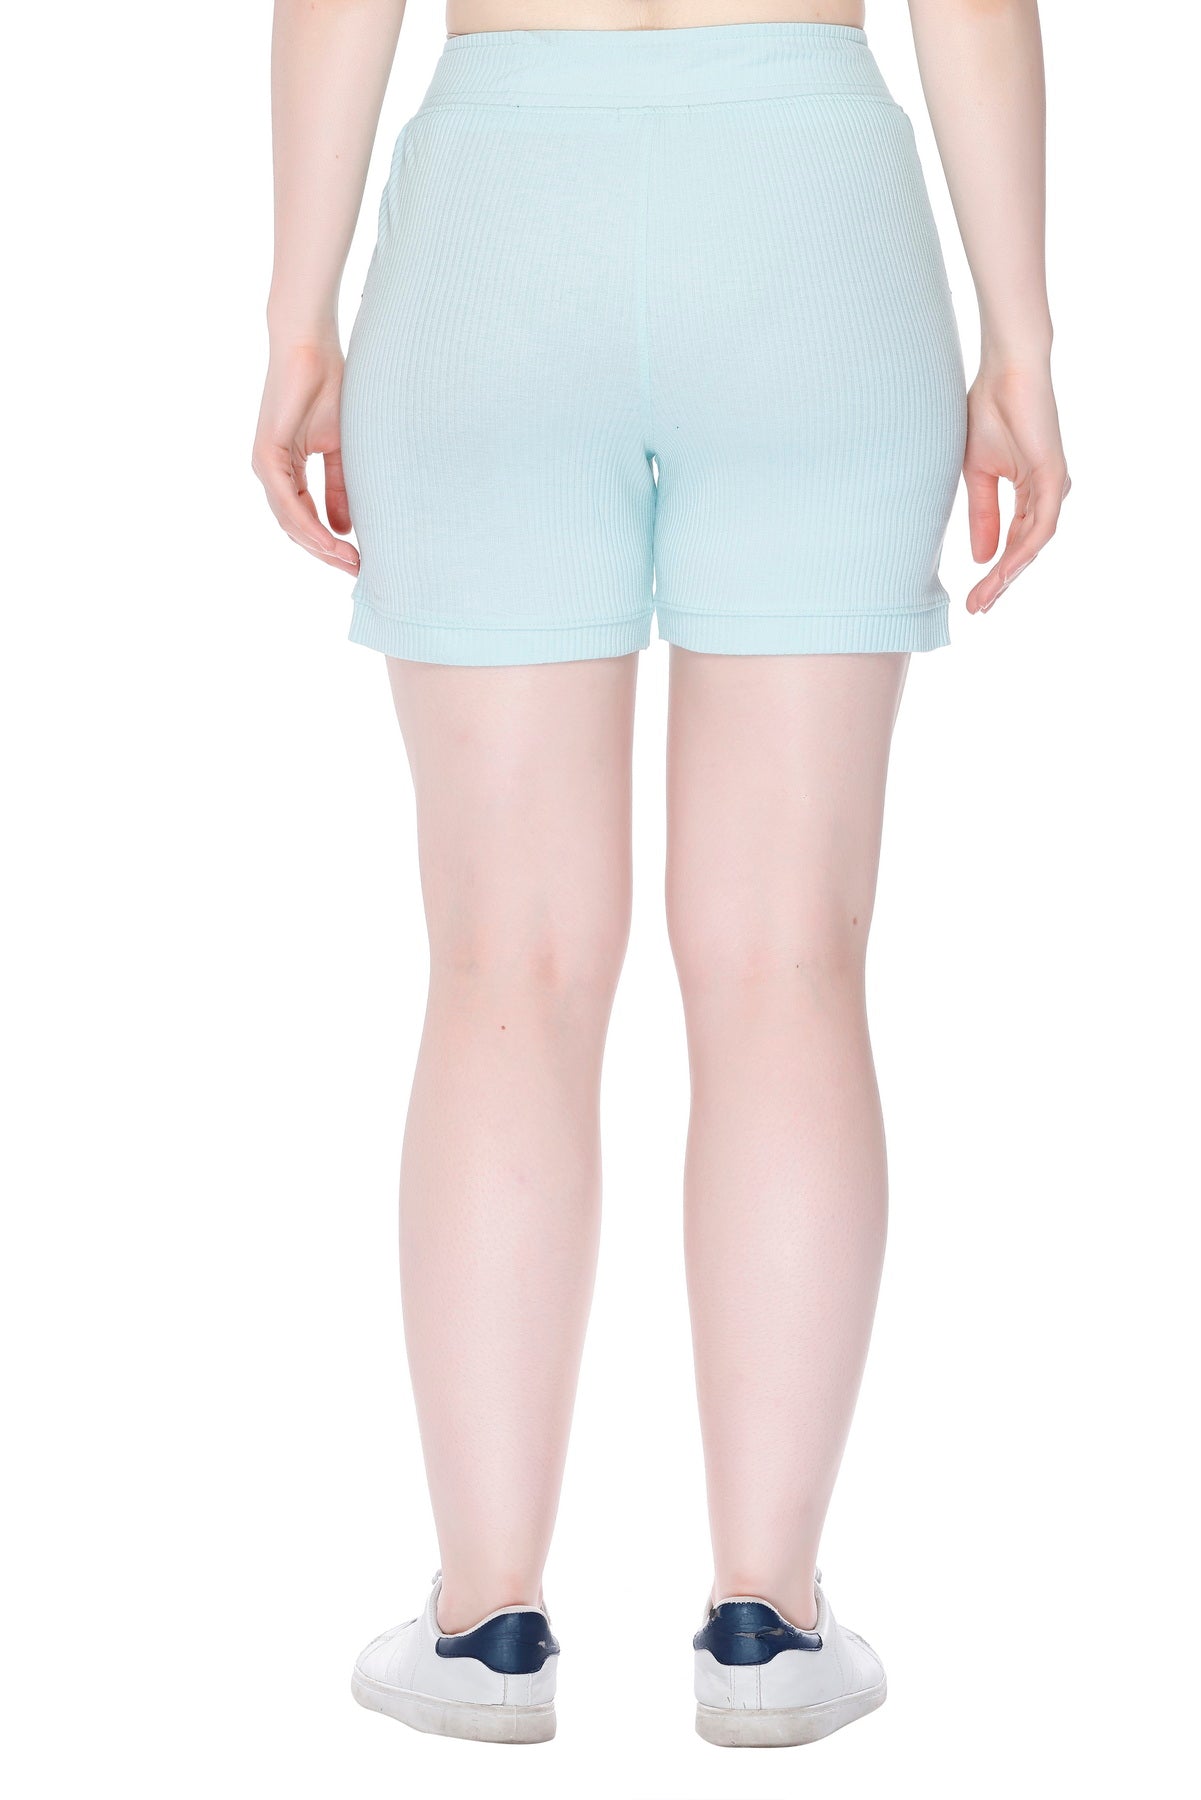 Comfortable Cotton Shorts For Women Combo (Black & Mint) Online In India